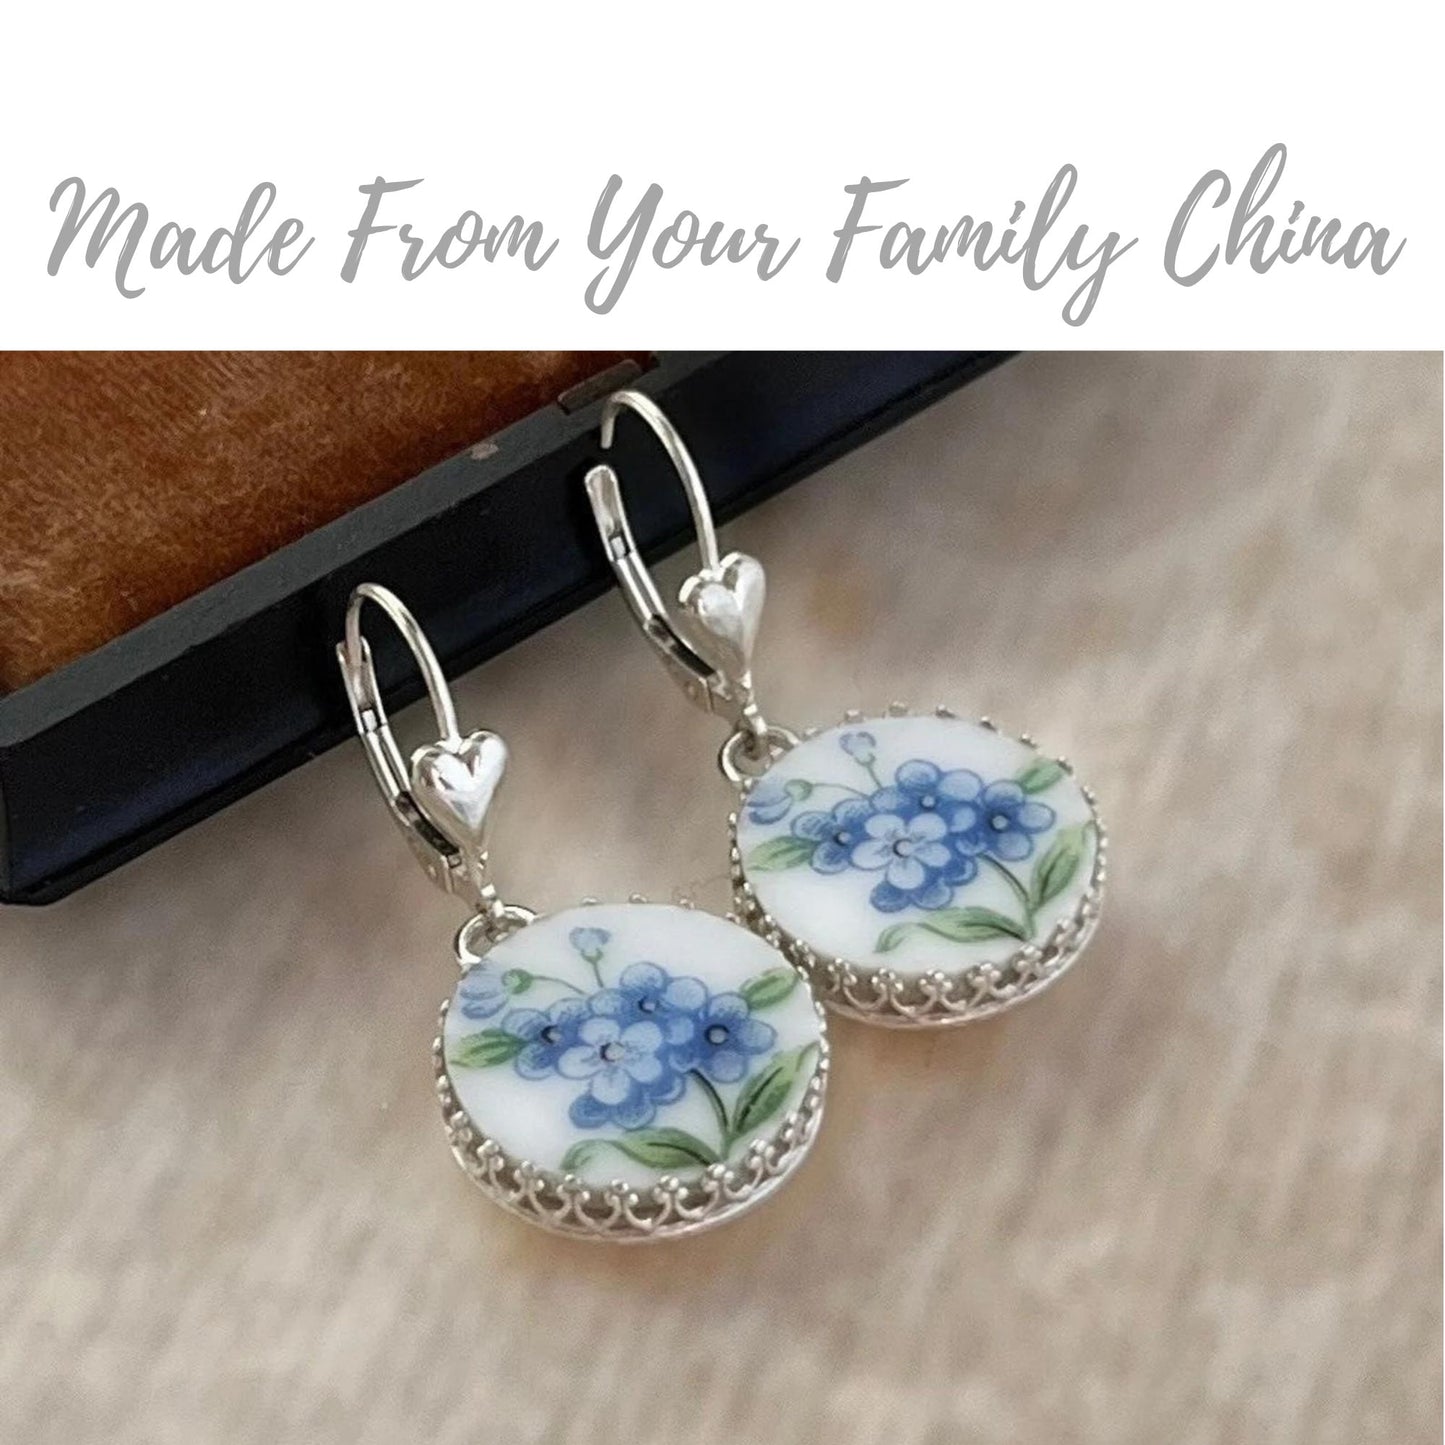 CUSTOM ORDER Silver Dainty Heart China Earrings, Custom Broken China Jewelry, Family Jewelry, Gift for Wife, Mom Gift, Made From Your China